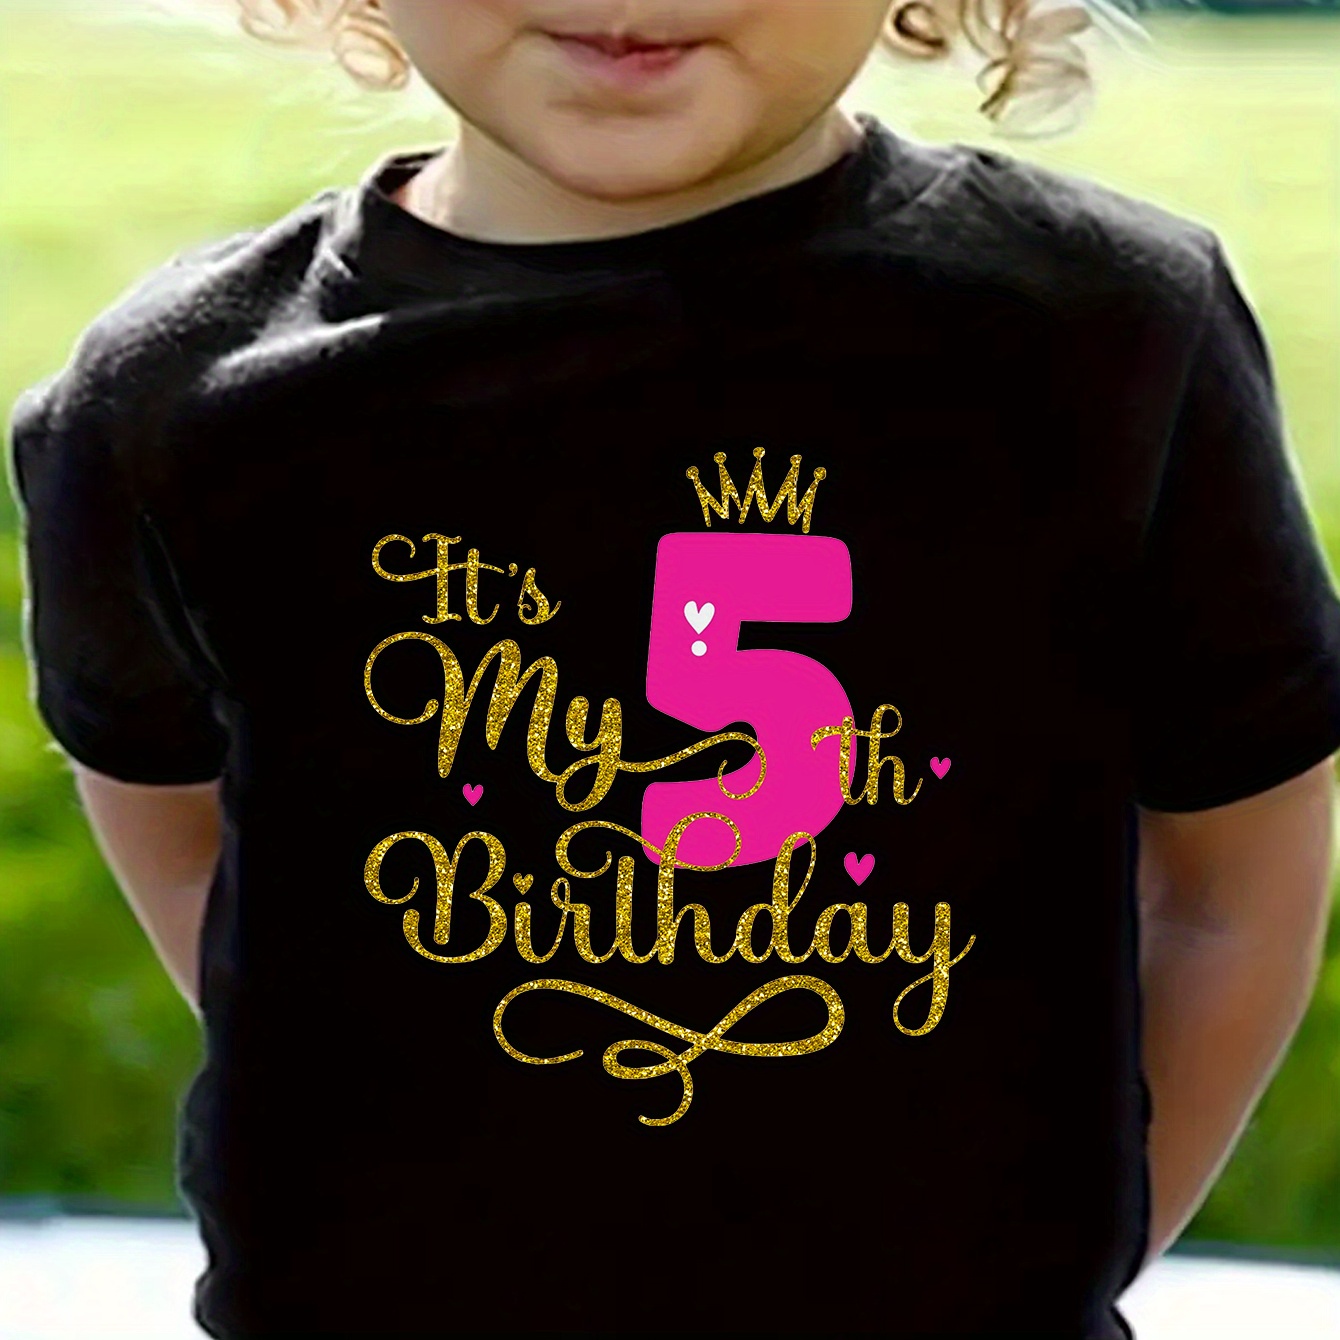 

It's My 5th Birthday & Crown Graphic Print Tee, Girls' Casual & Trendy Crew Neck Short Sleeve Cotton T-shirt For Spring & Summer, Girls' Clothes For Outdoor Activities